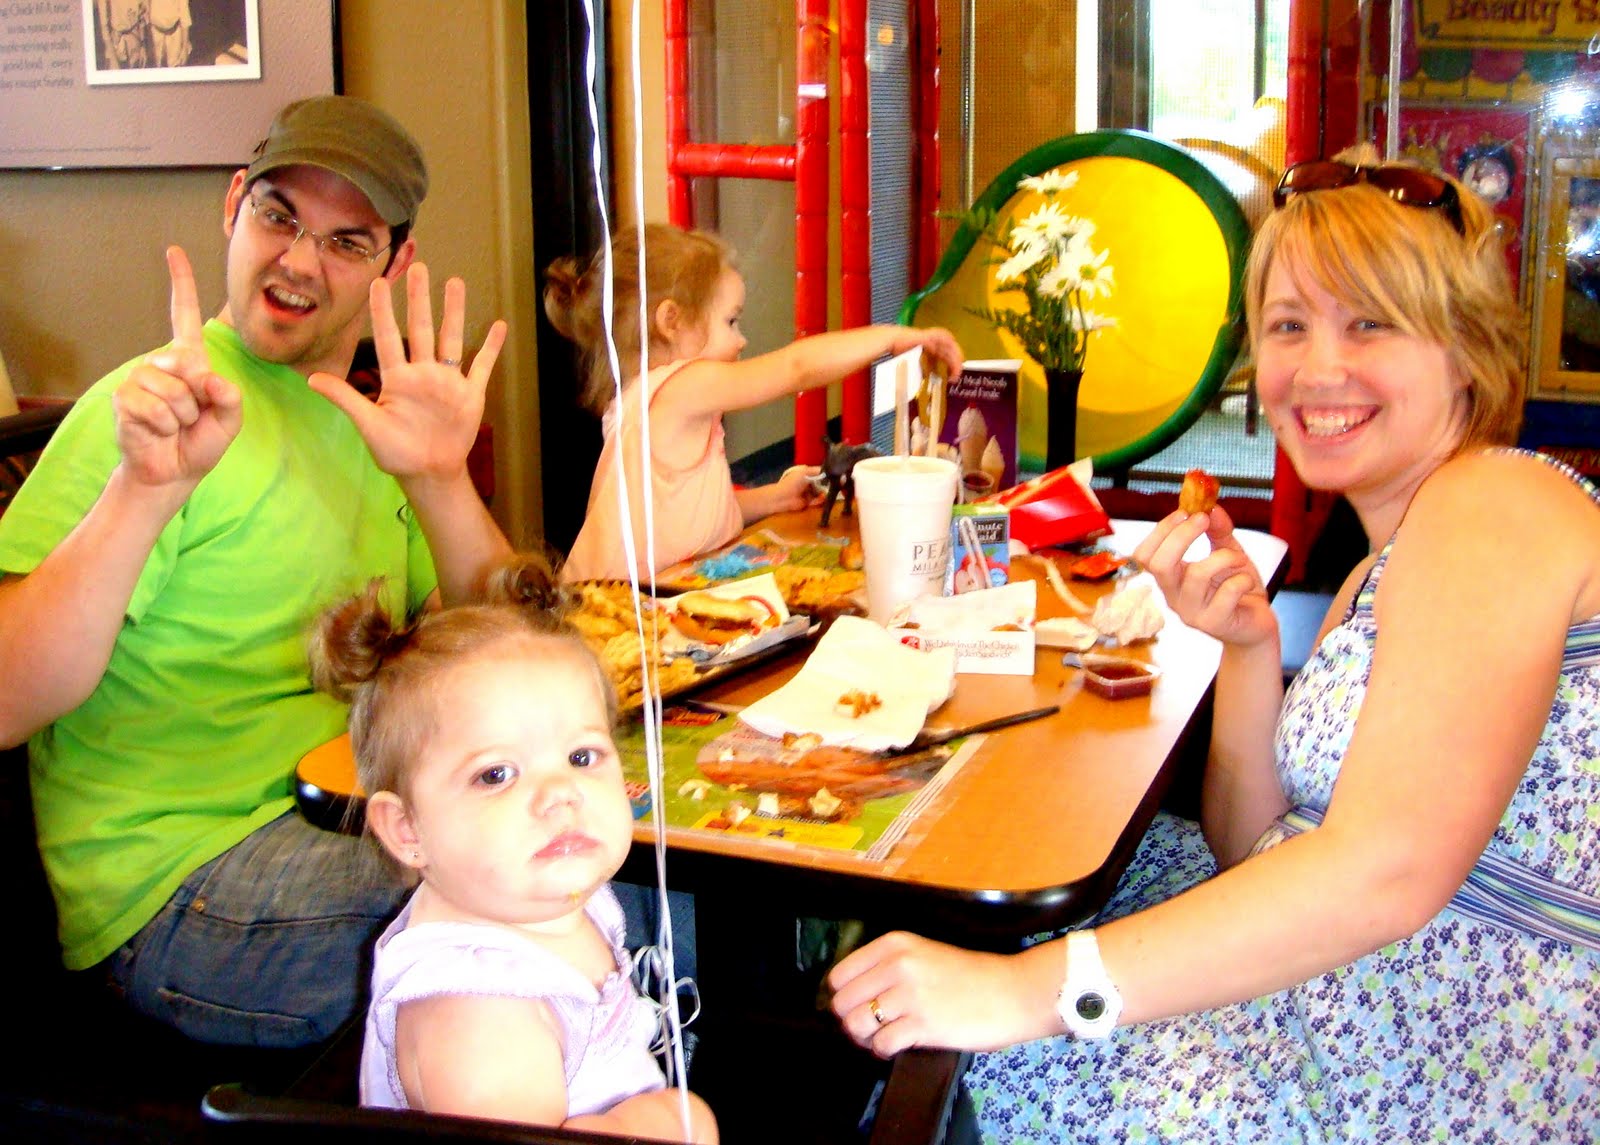 Family Night at Chick-fil-A